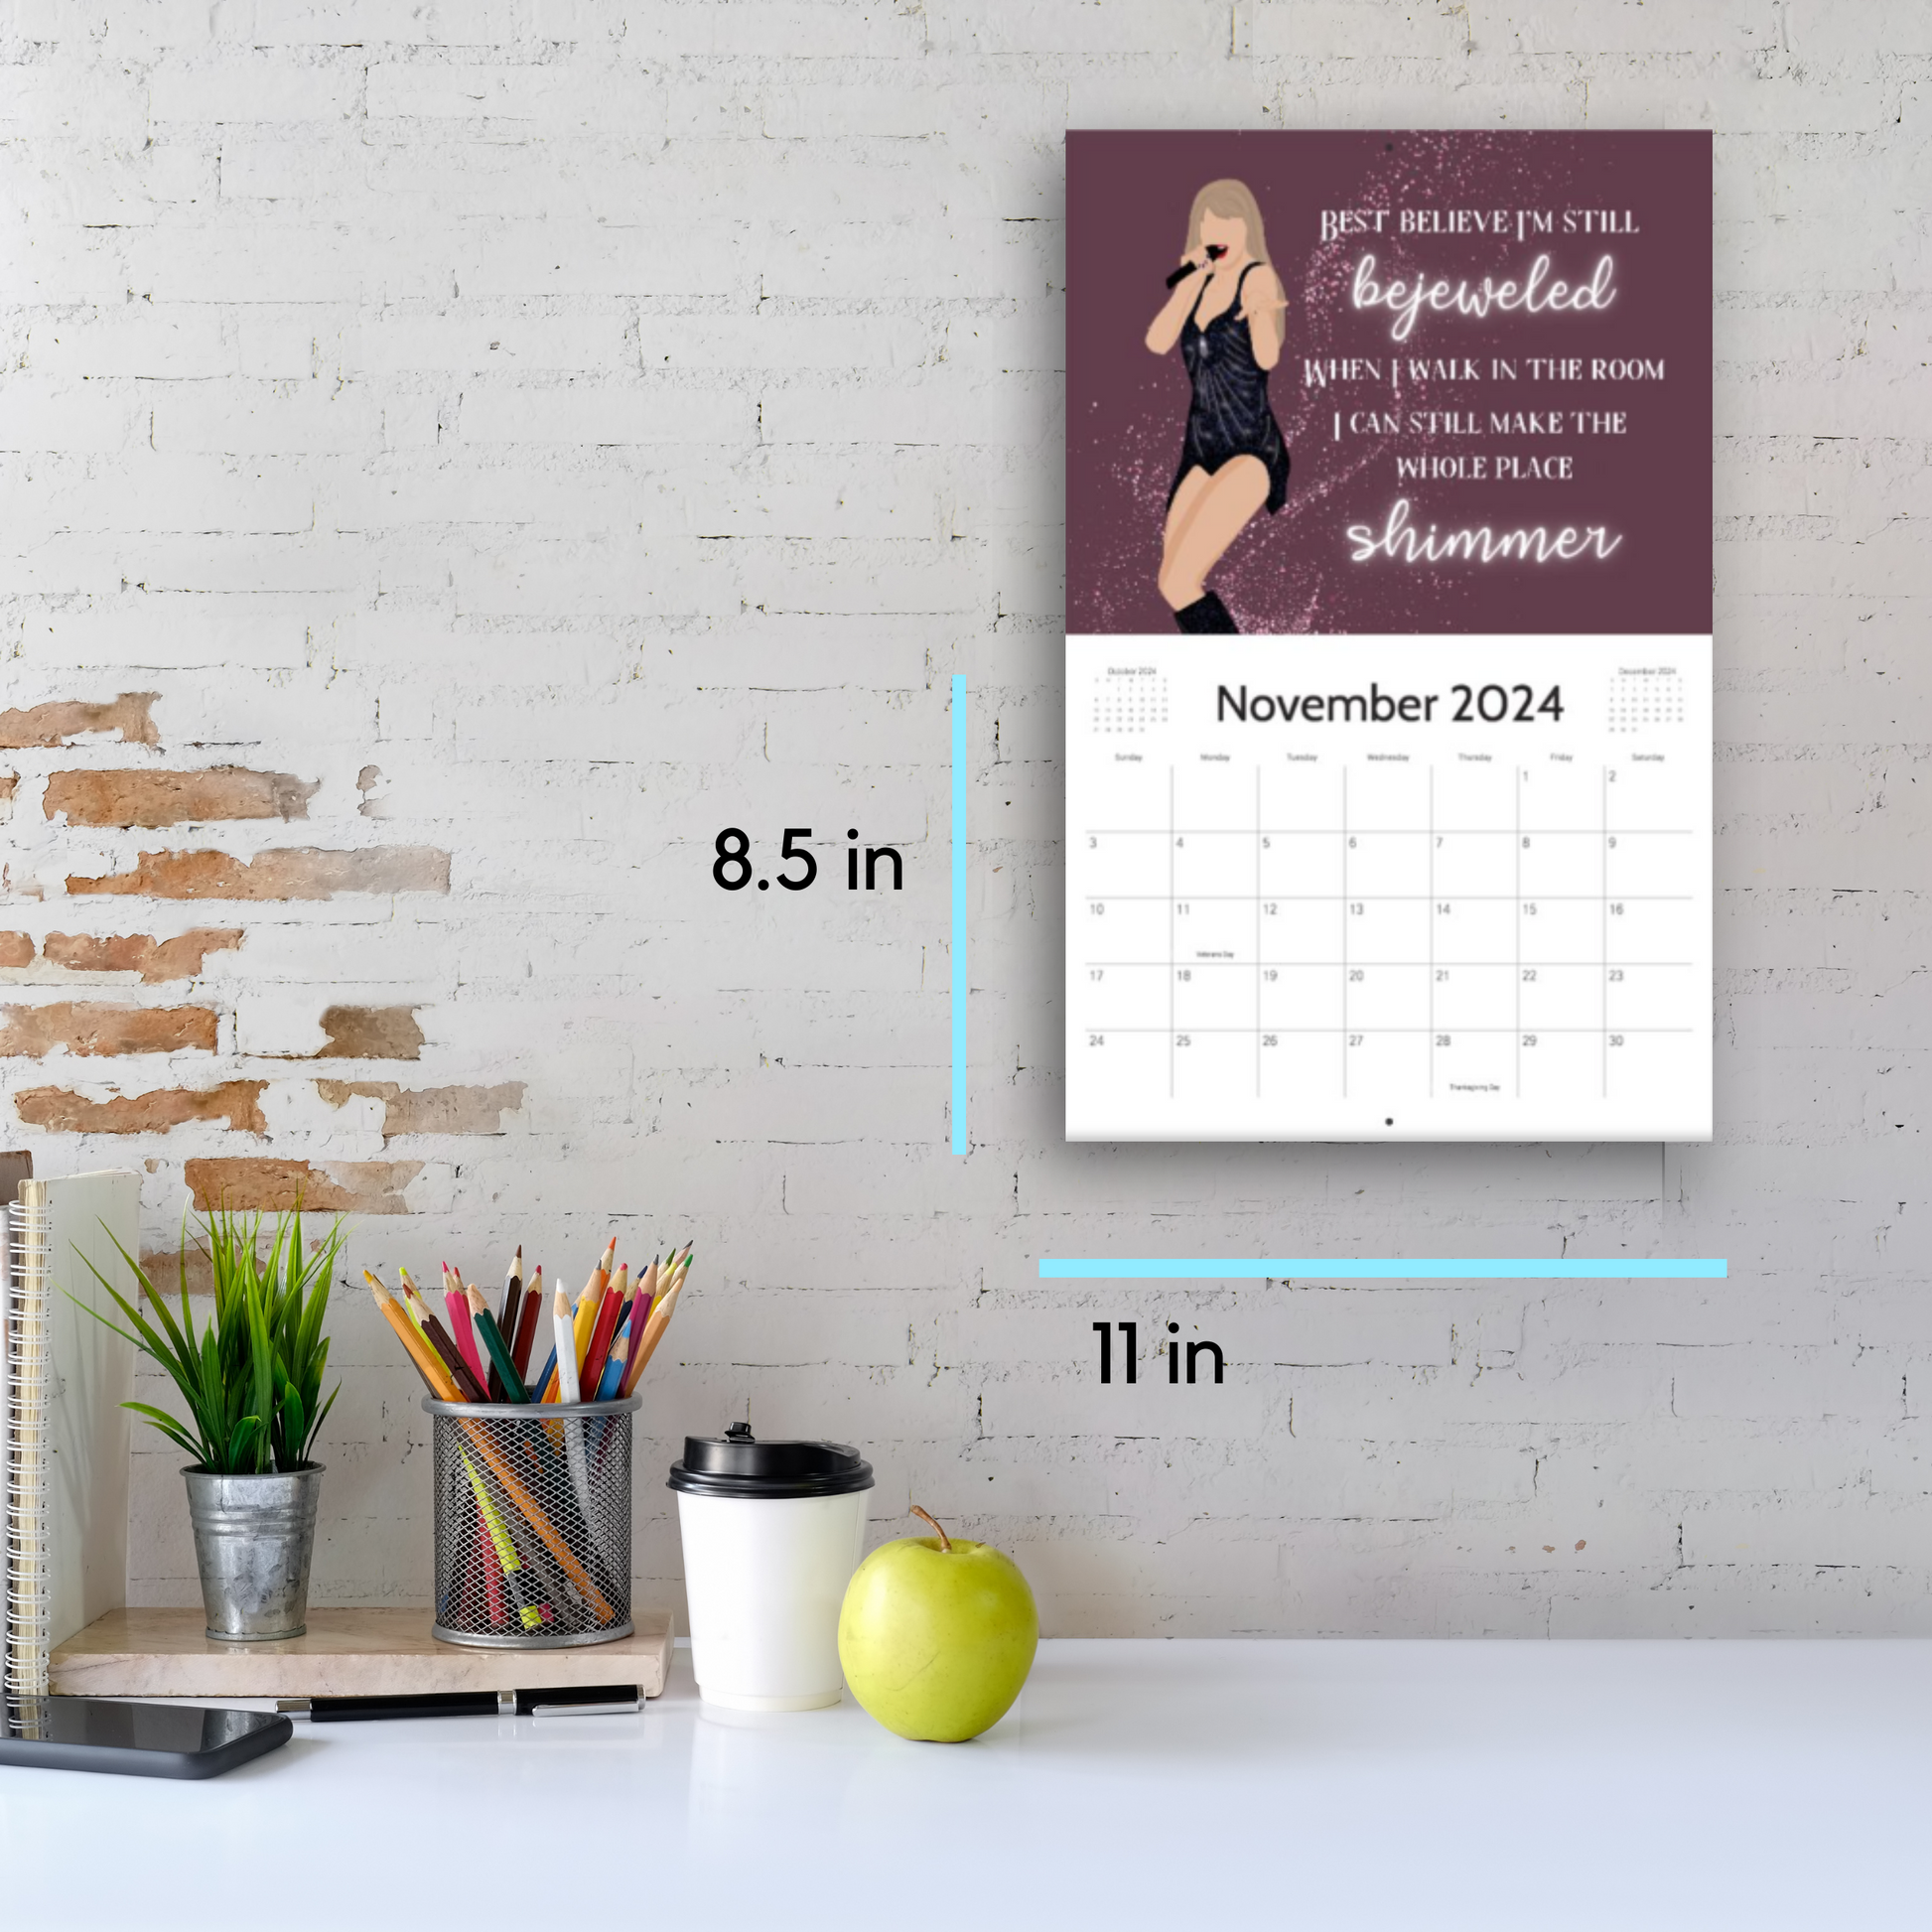 Taylor Swift 2024 Wall Calendar, sizing guide in reference to office decor